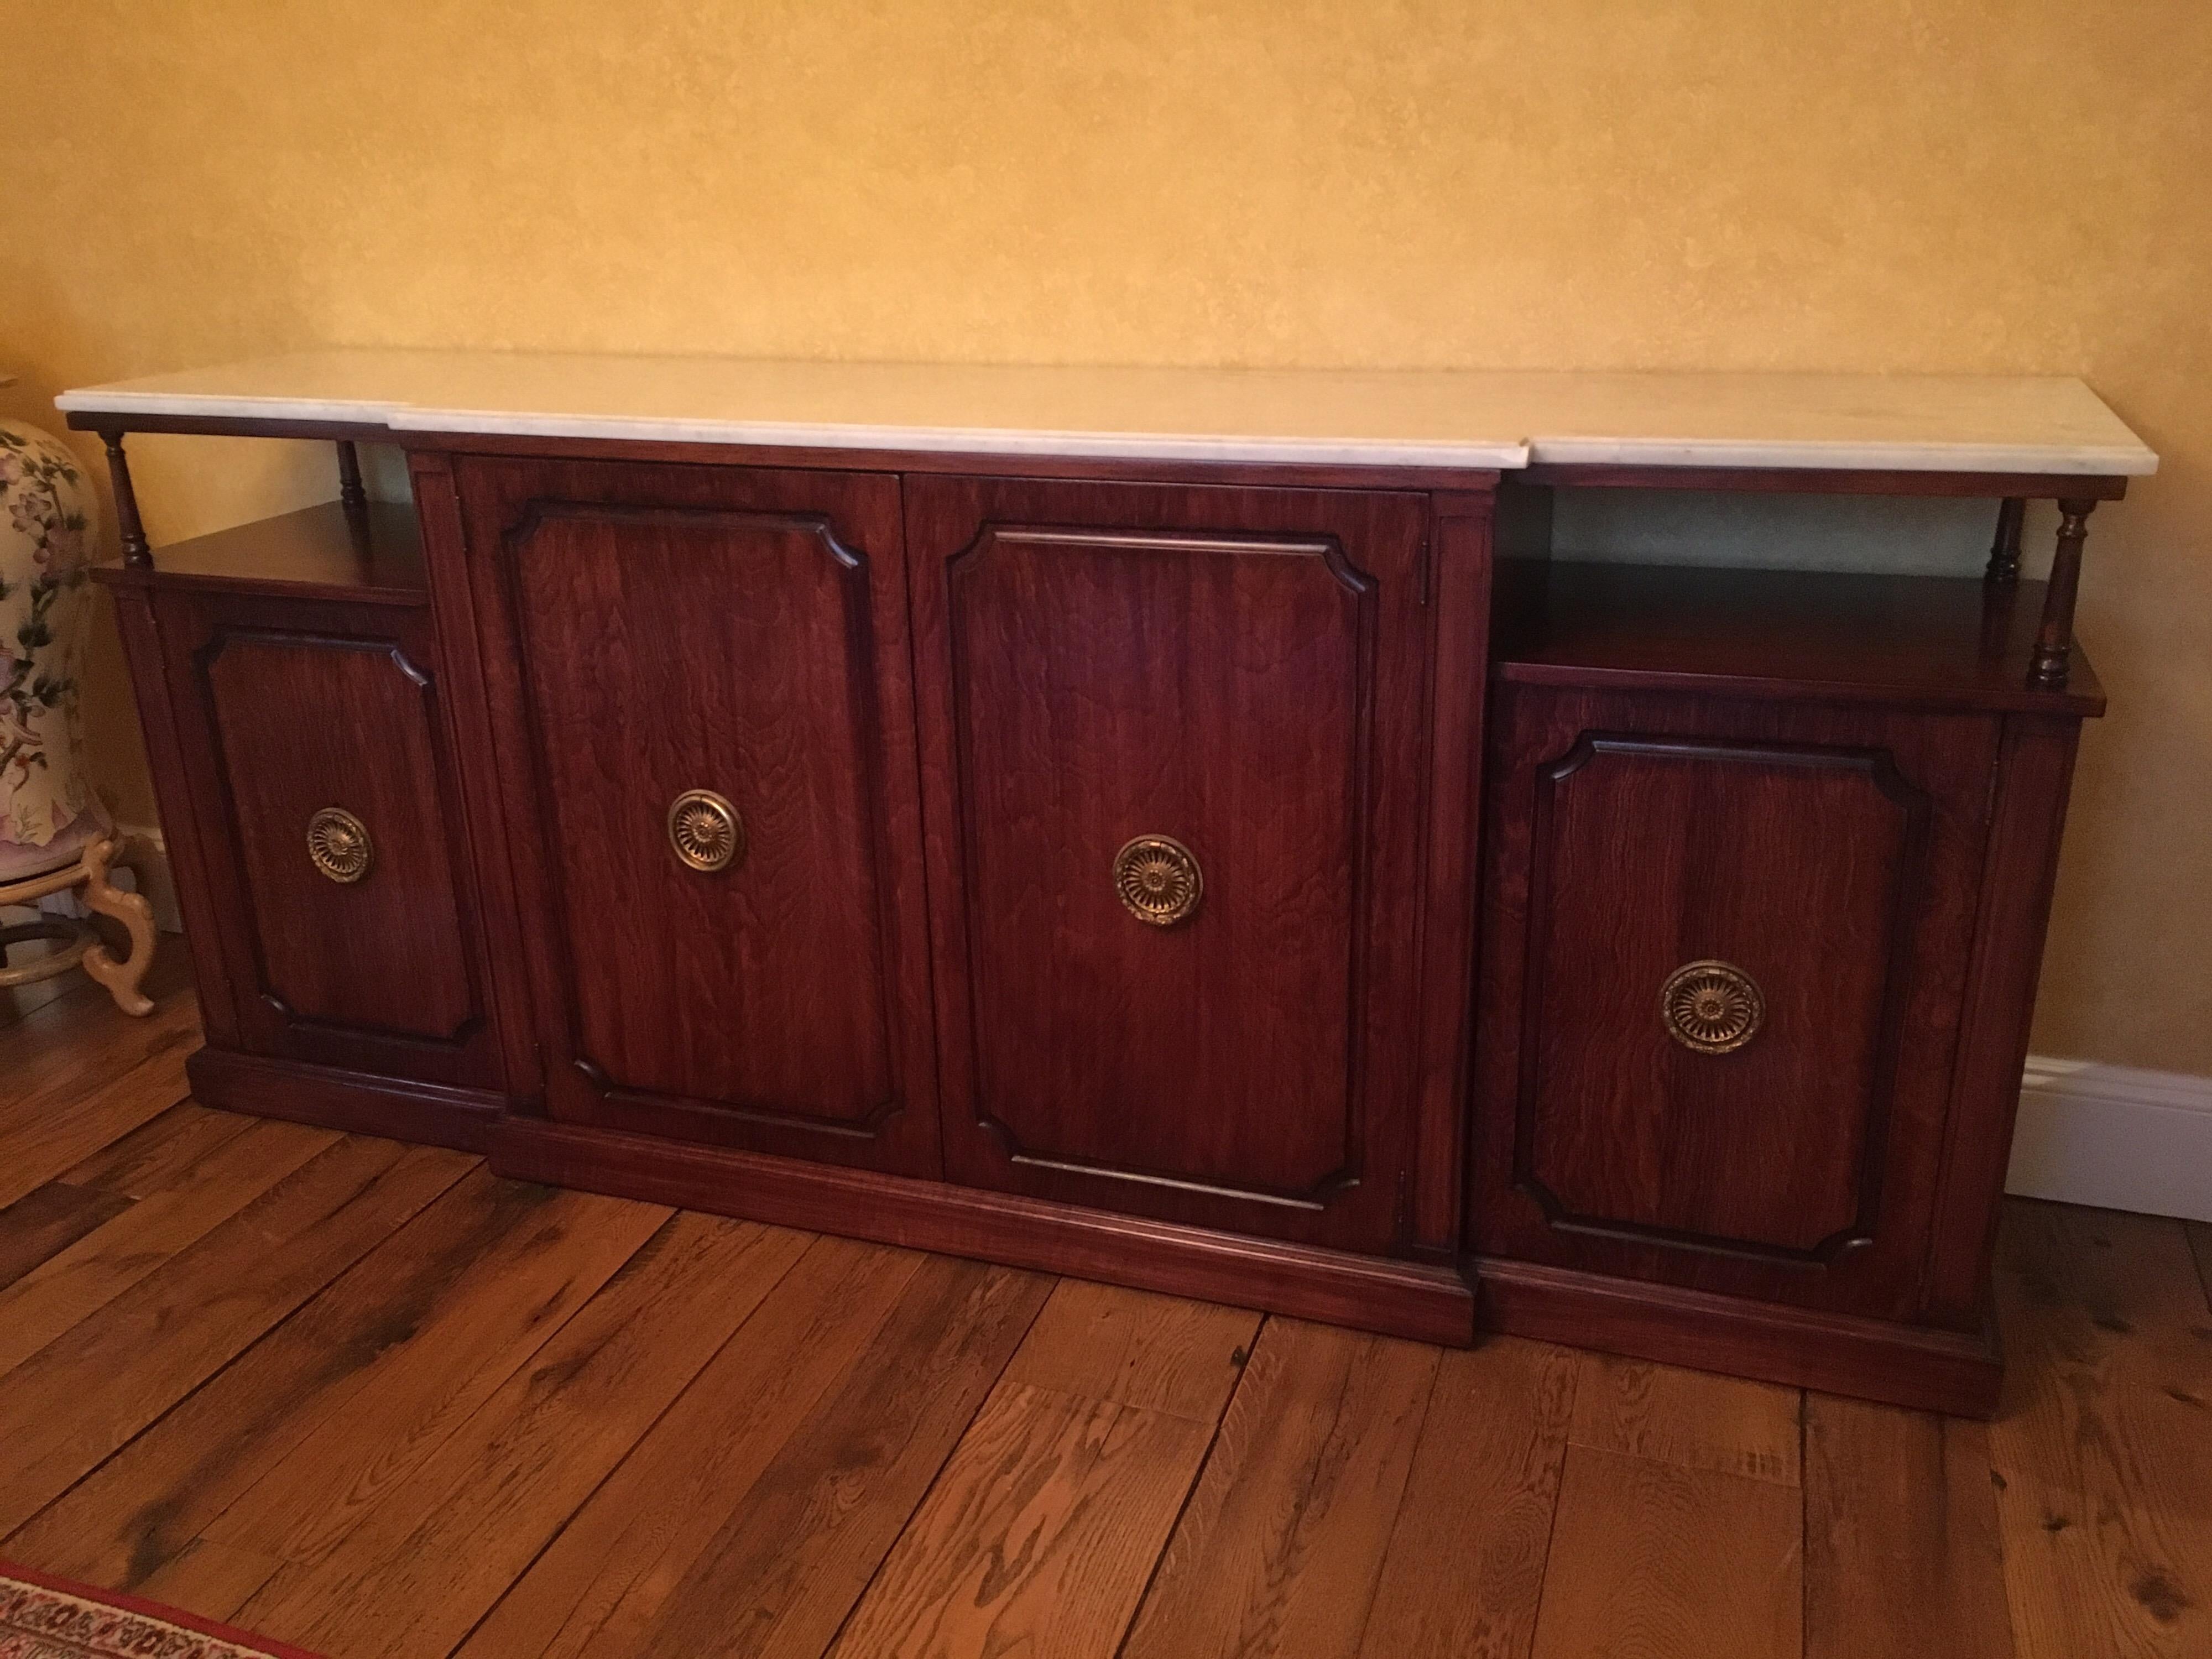 Rosewood Empire style credenza sideboard with marble top, circa 1950s. Original hardware. A chip to the marble on the right facing edge of the top is shown in photo.

Shelf above two smaller doors: 8